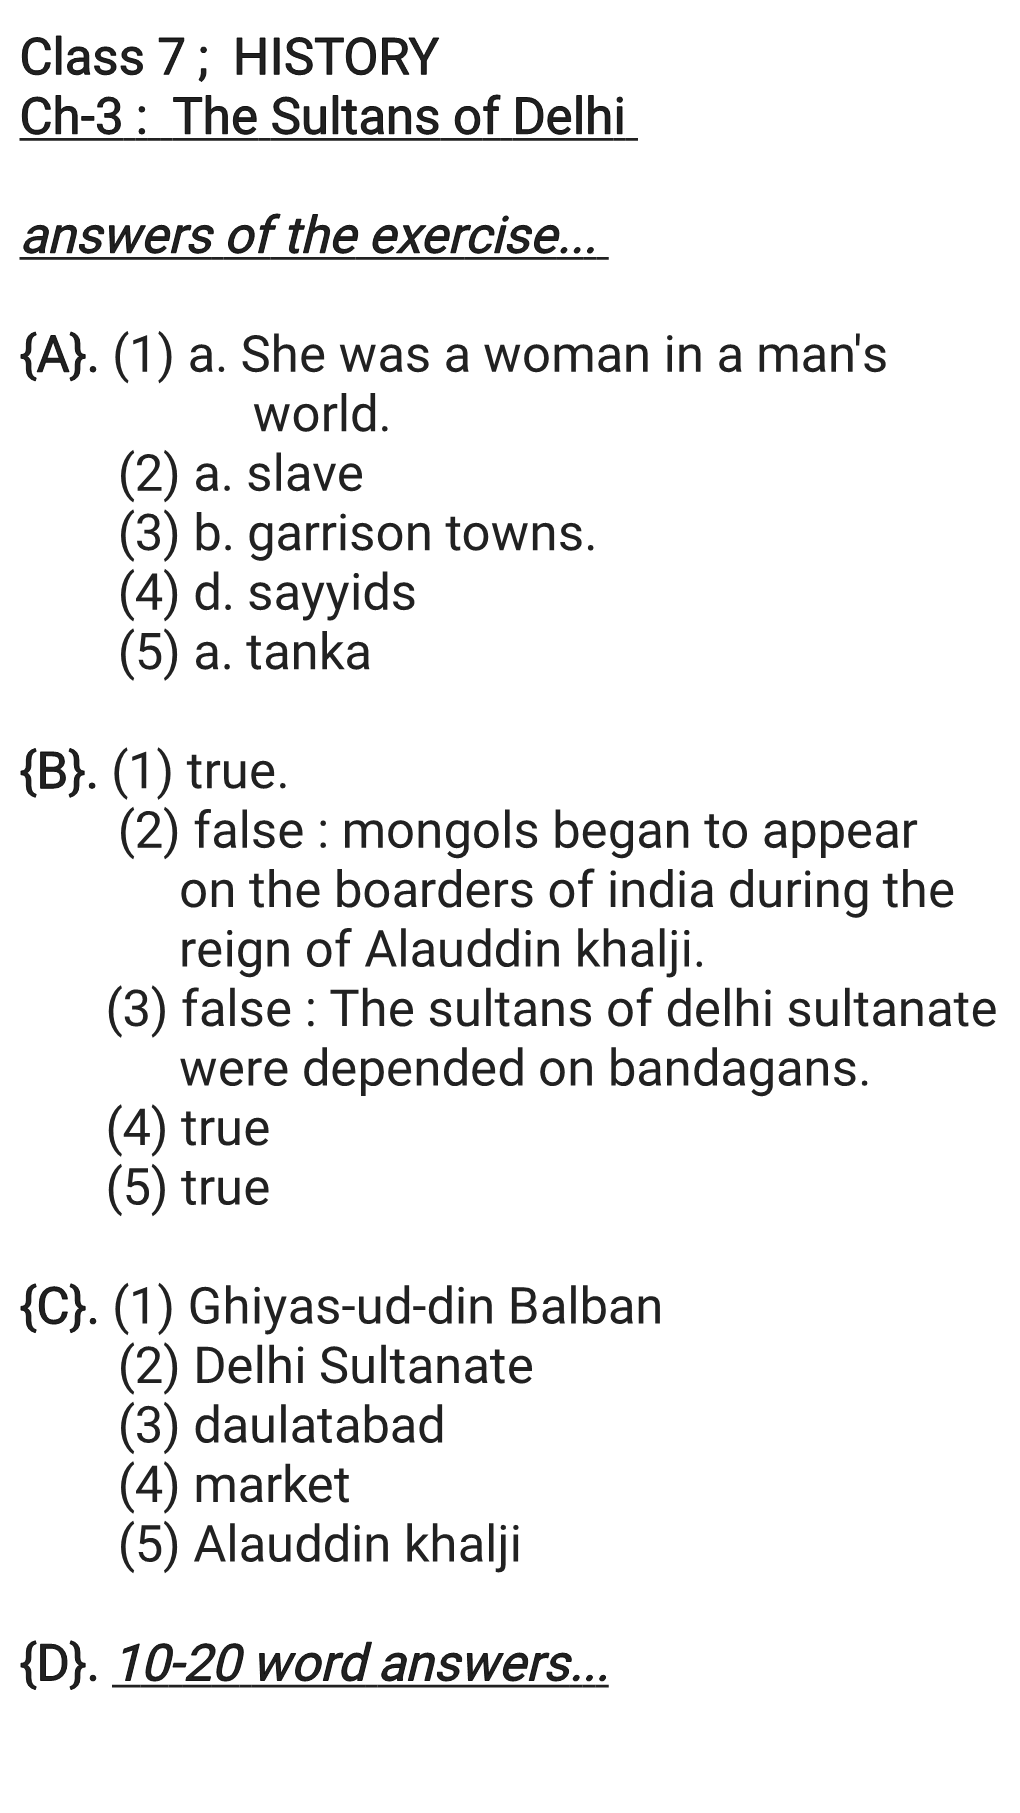 {D}. 10-20 Word Answers... (1)